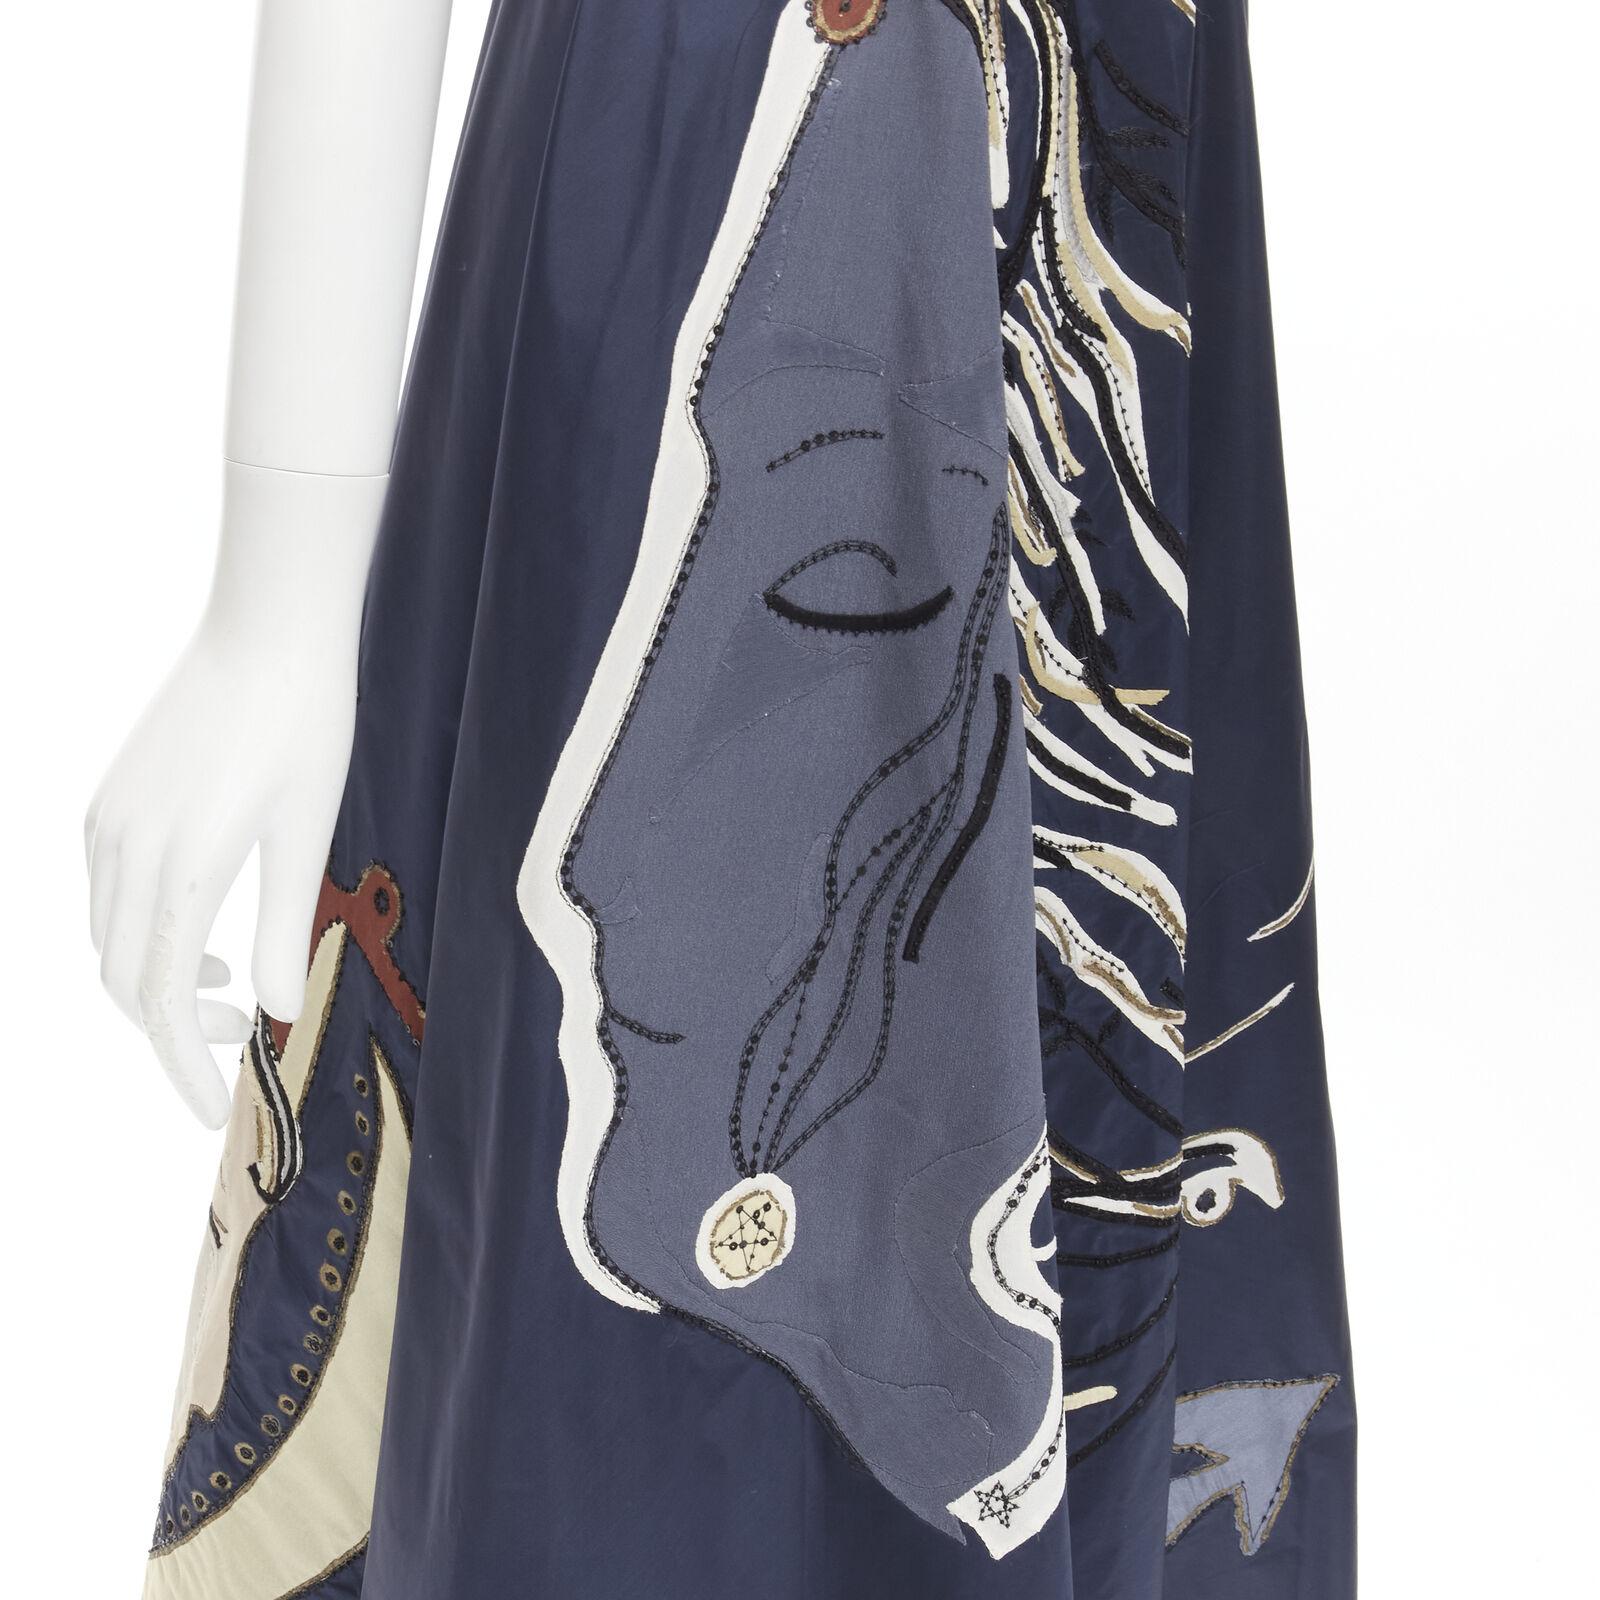 CHRISTIAN DIOR Look 33 100% silk face dove hand embroidered gown FR36 S
Reference: AAWC/A00044
Brand: Christian Dior
Designer: Maria Grazia Chiuri
Collection: Trunk Show Look 33 - Runway
Material: 100% Silk
Color: Navy
Pattern: